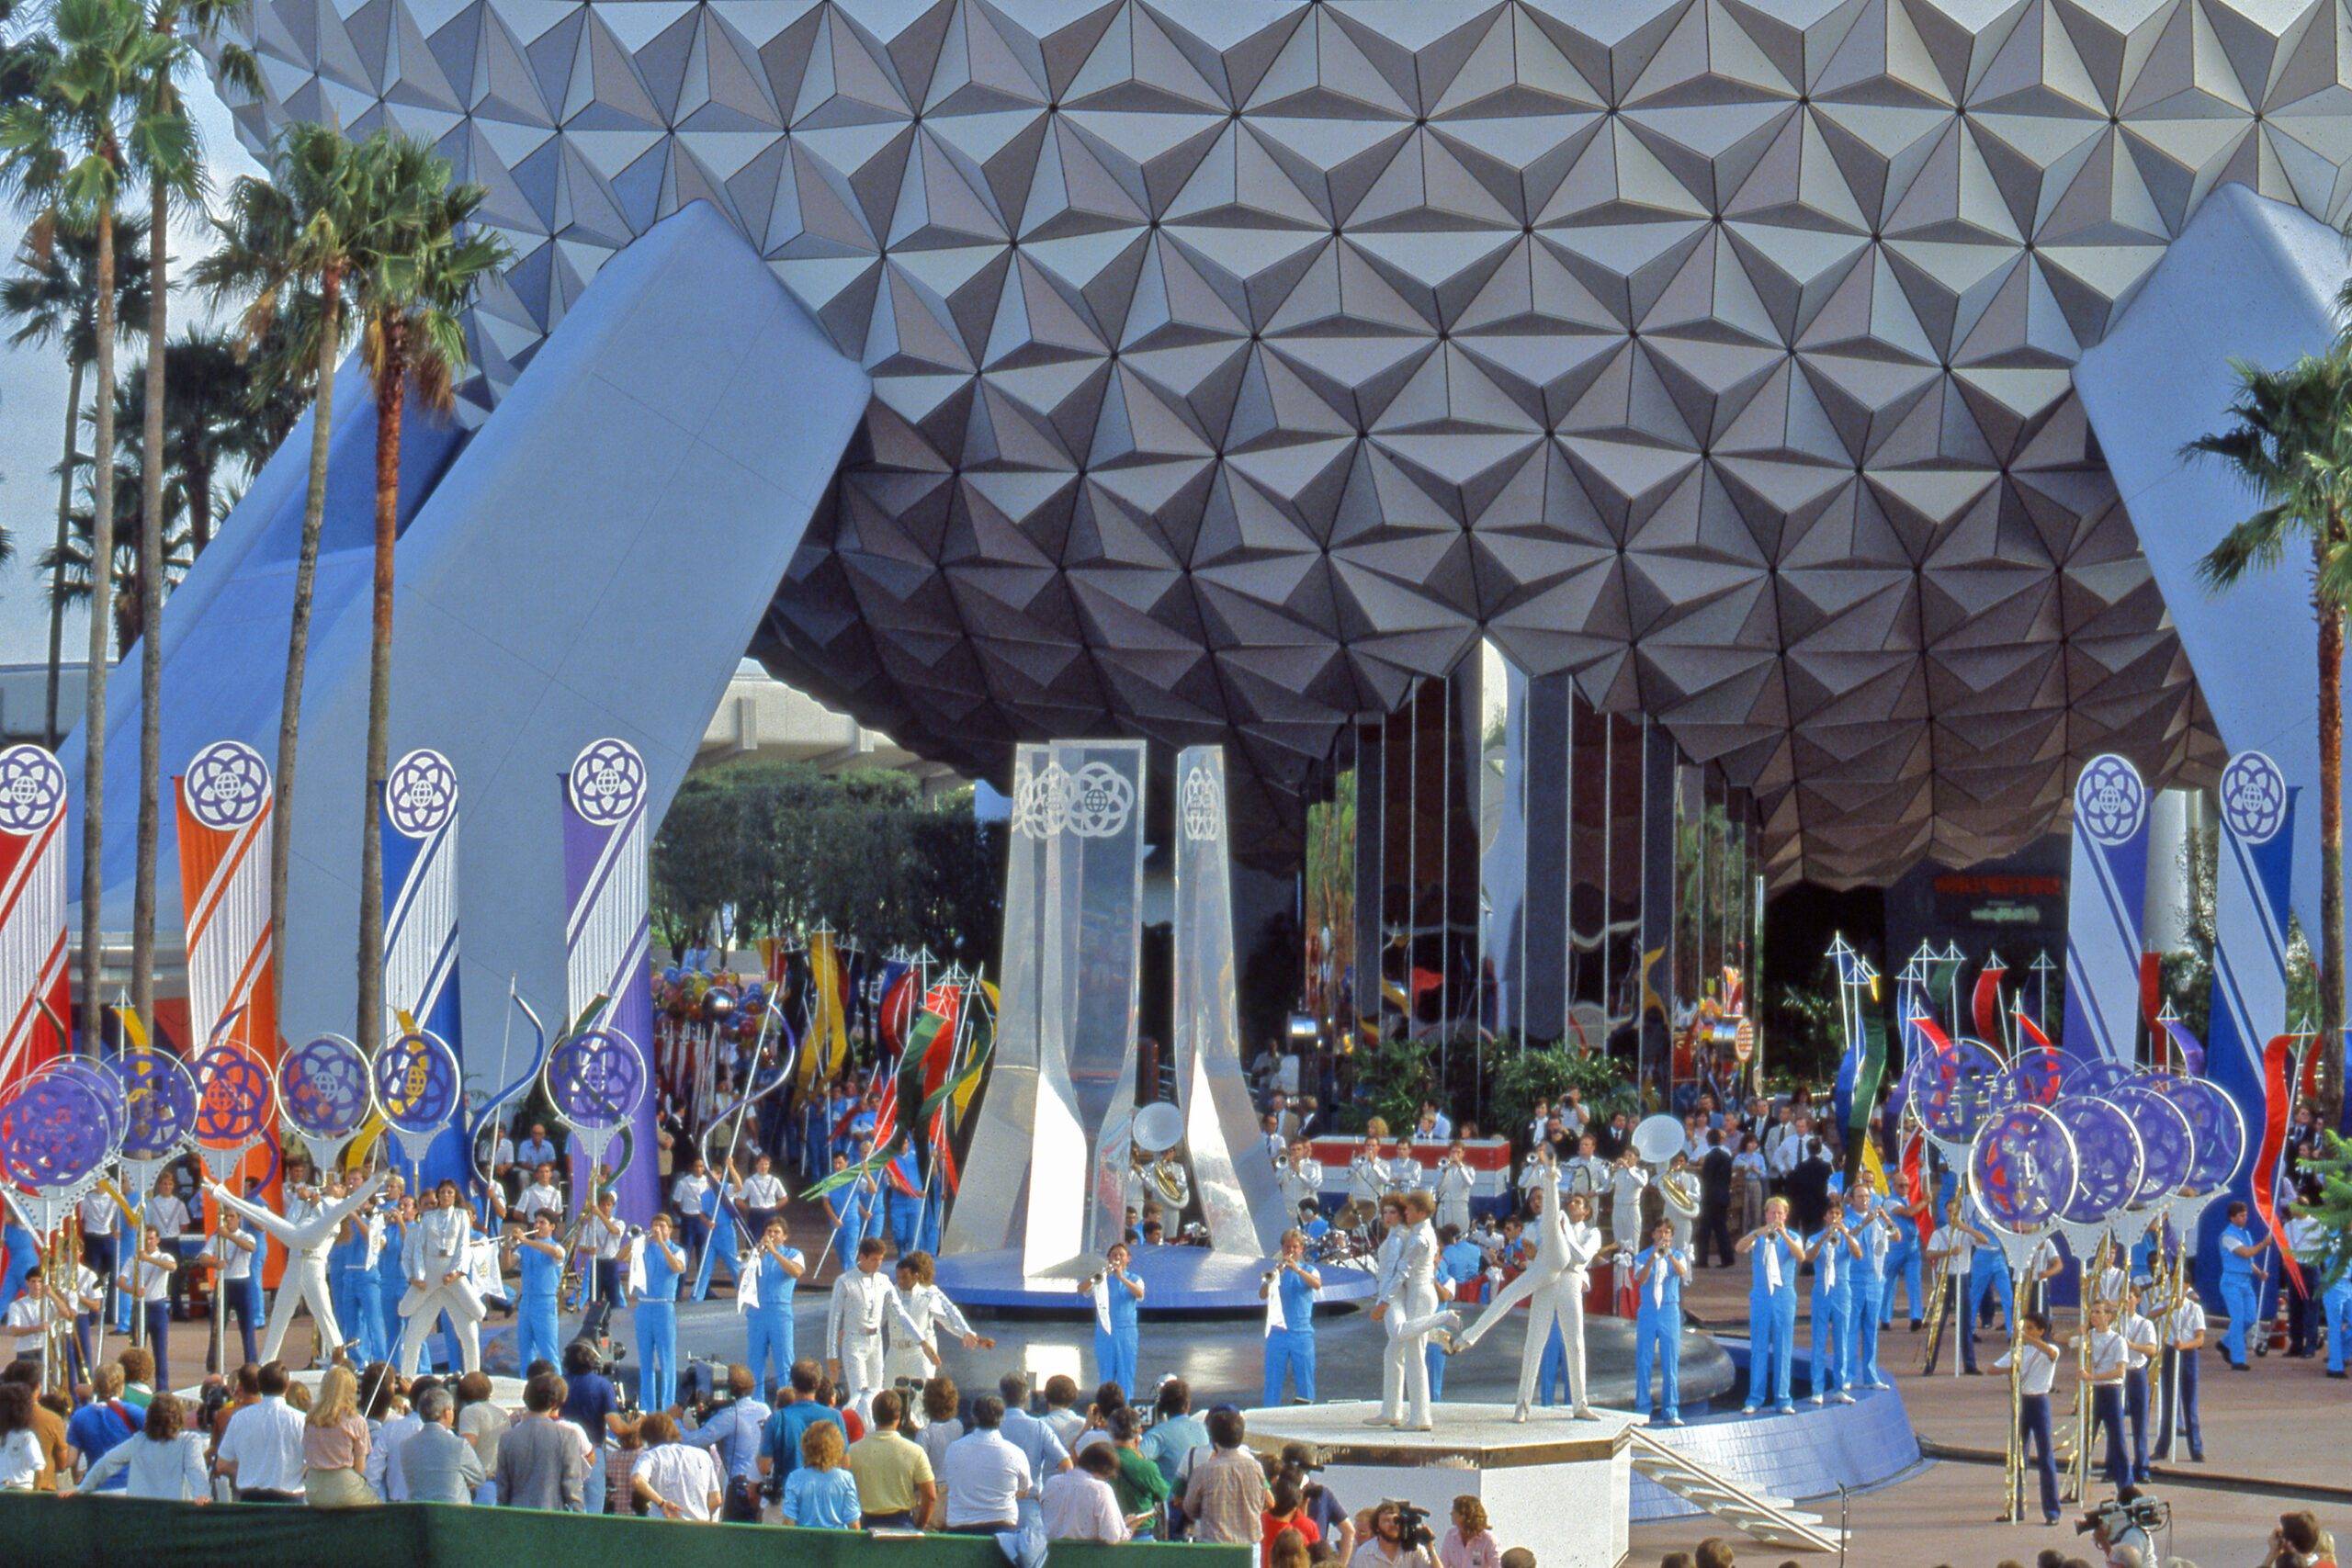 Grand opening ceremony at EPCOT in 1982 at Walt Disney World Resort